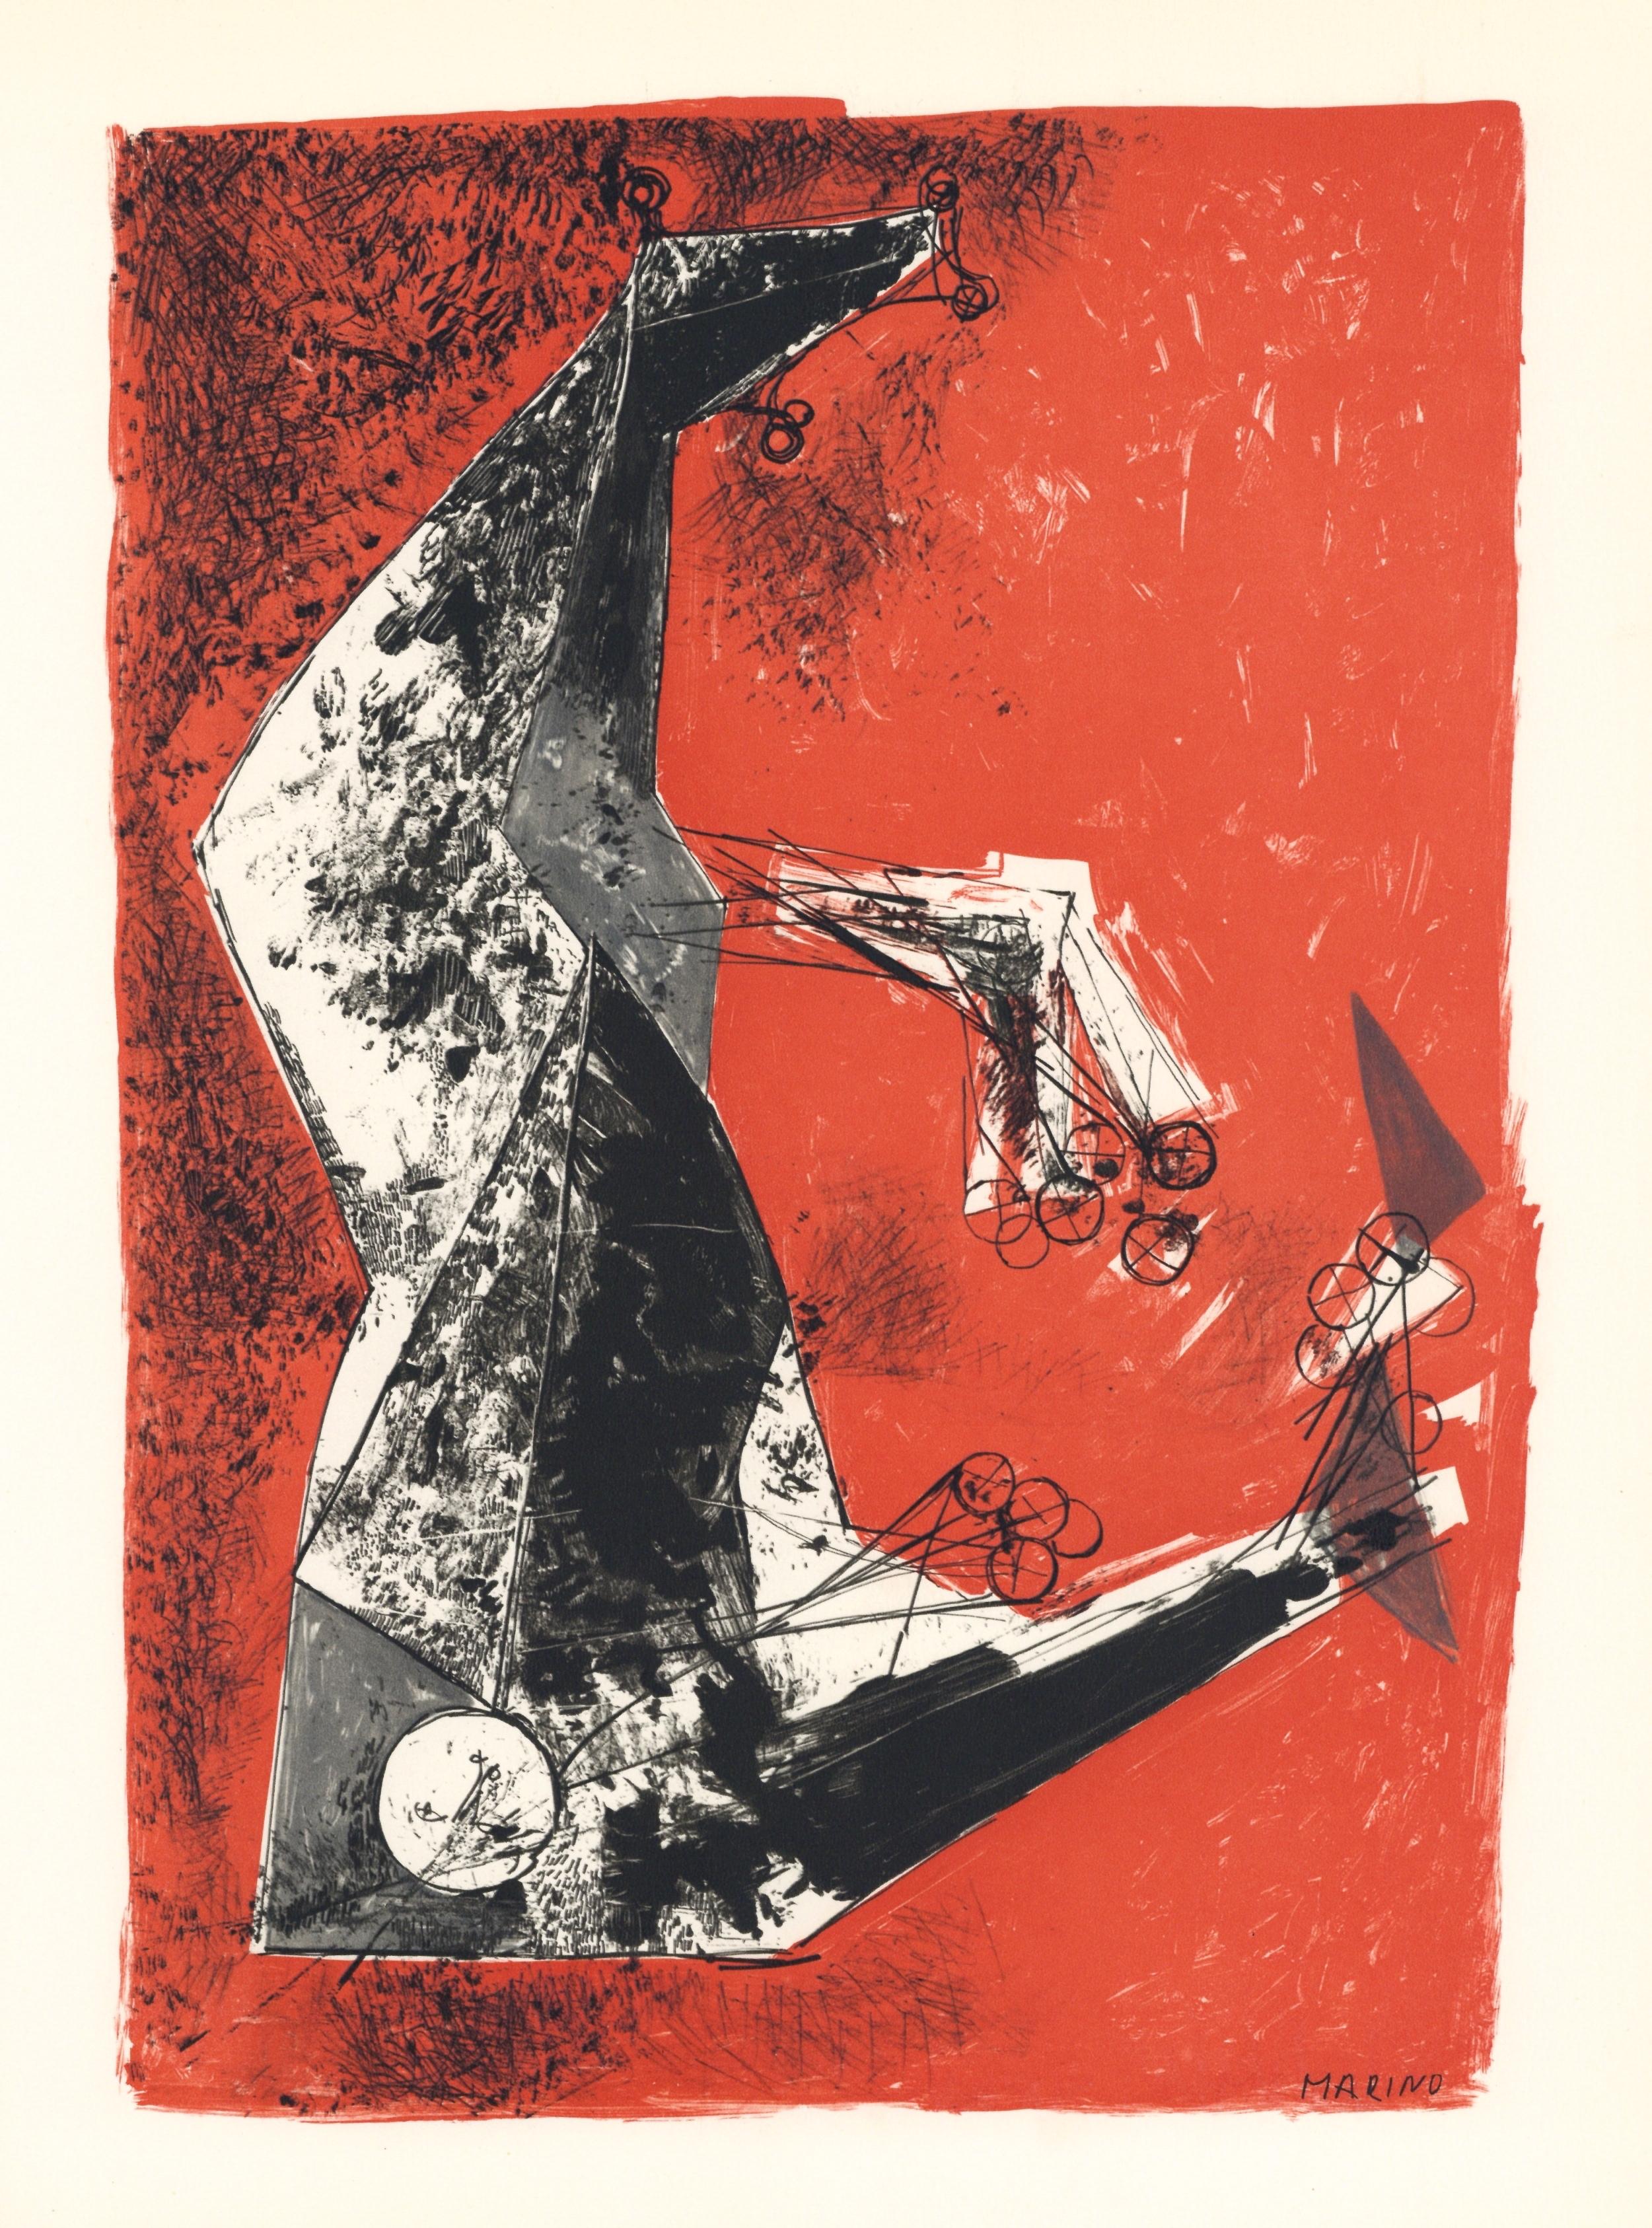 Medium: lithograph (after the original). Issued in 1959 in Milan by Silvana Editoriale in an edition of 300. The full sheet (including margins) measures 15 1/2 x 11 1/2 inches (395 x 290 mm). Signed in the plate (not hand-signed). 